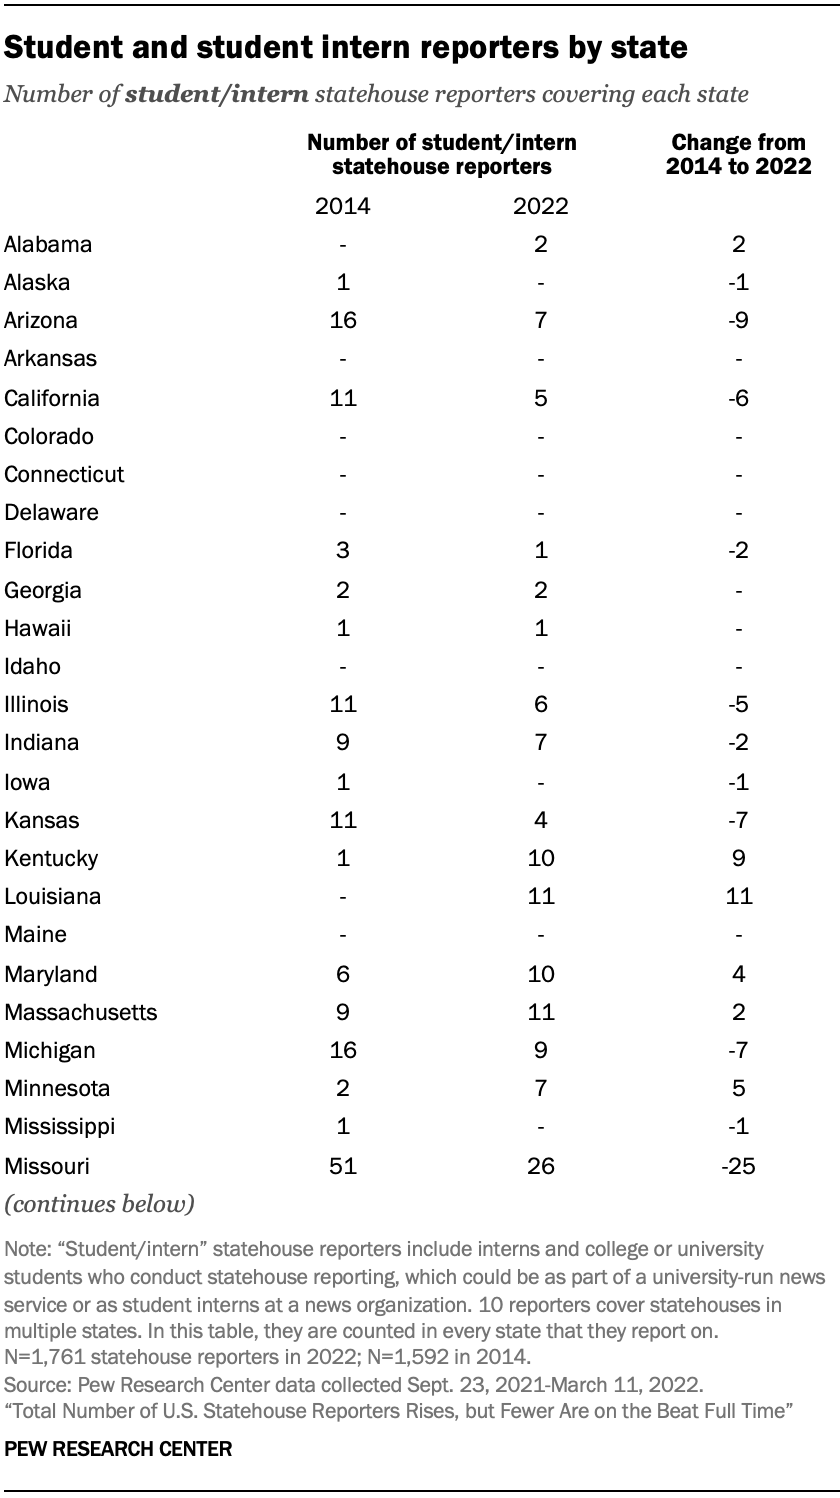 Student and student intern reporters by state